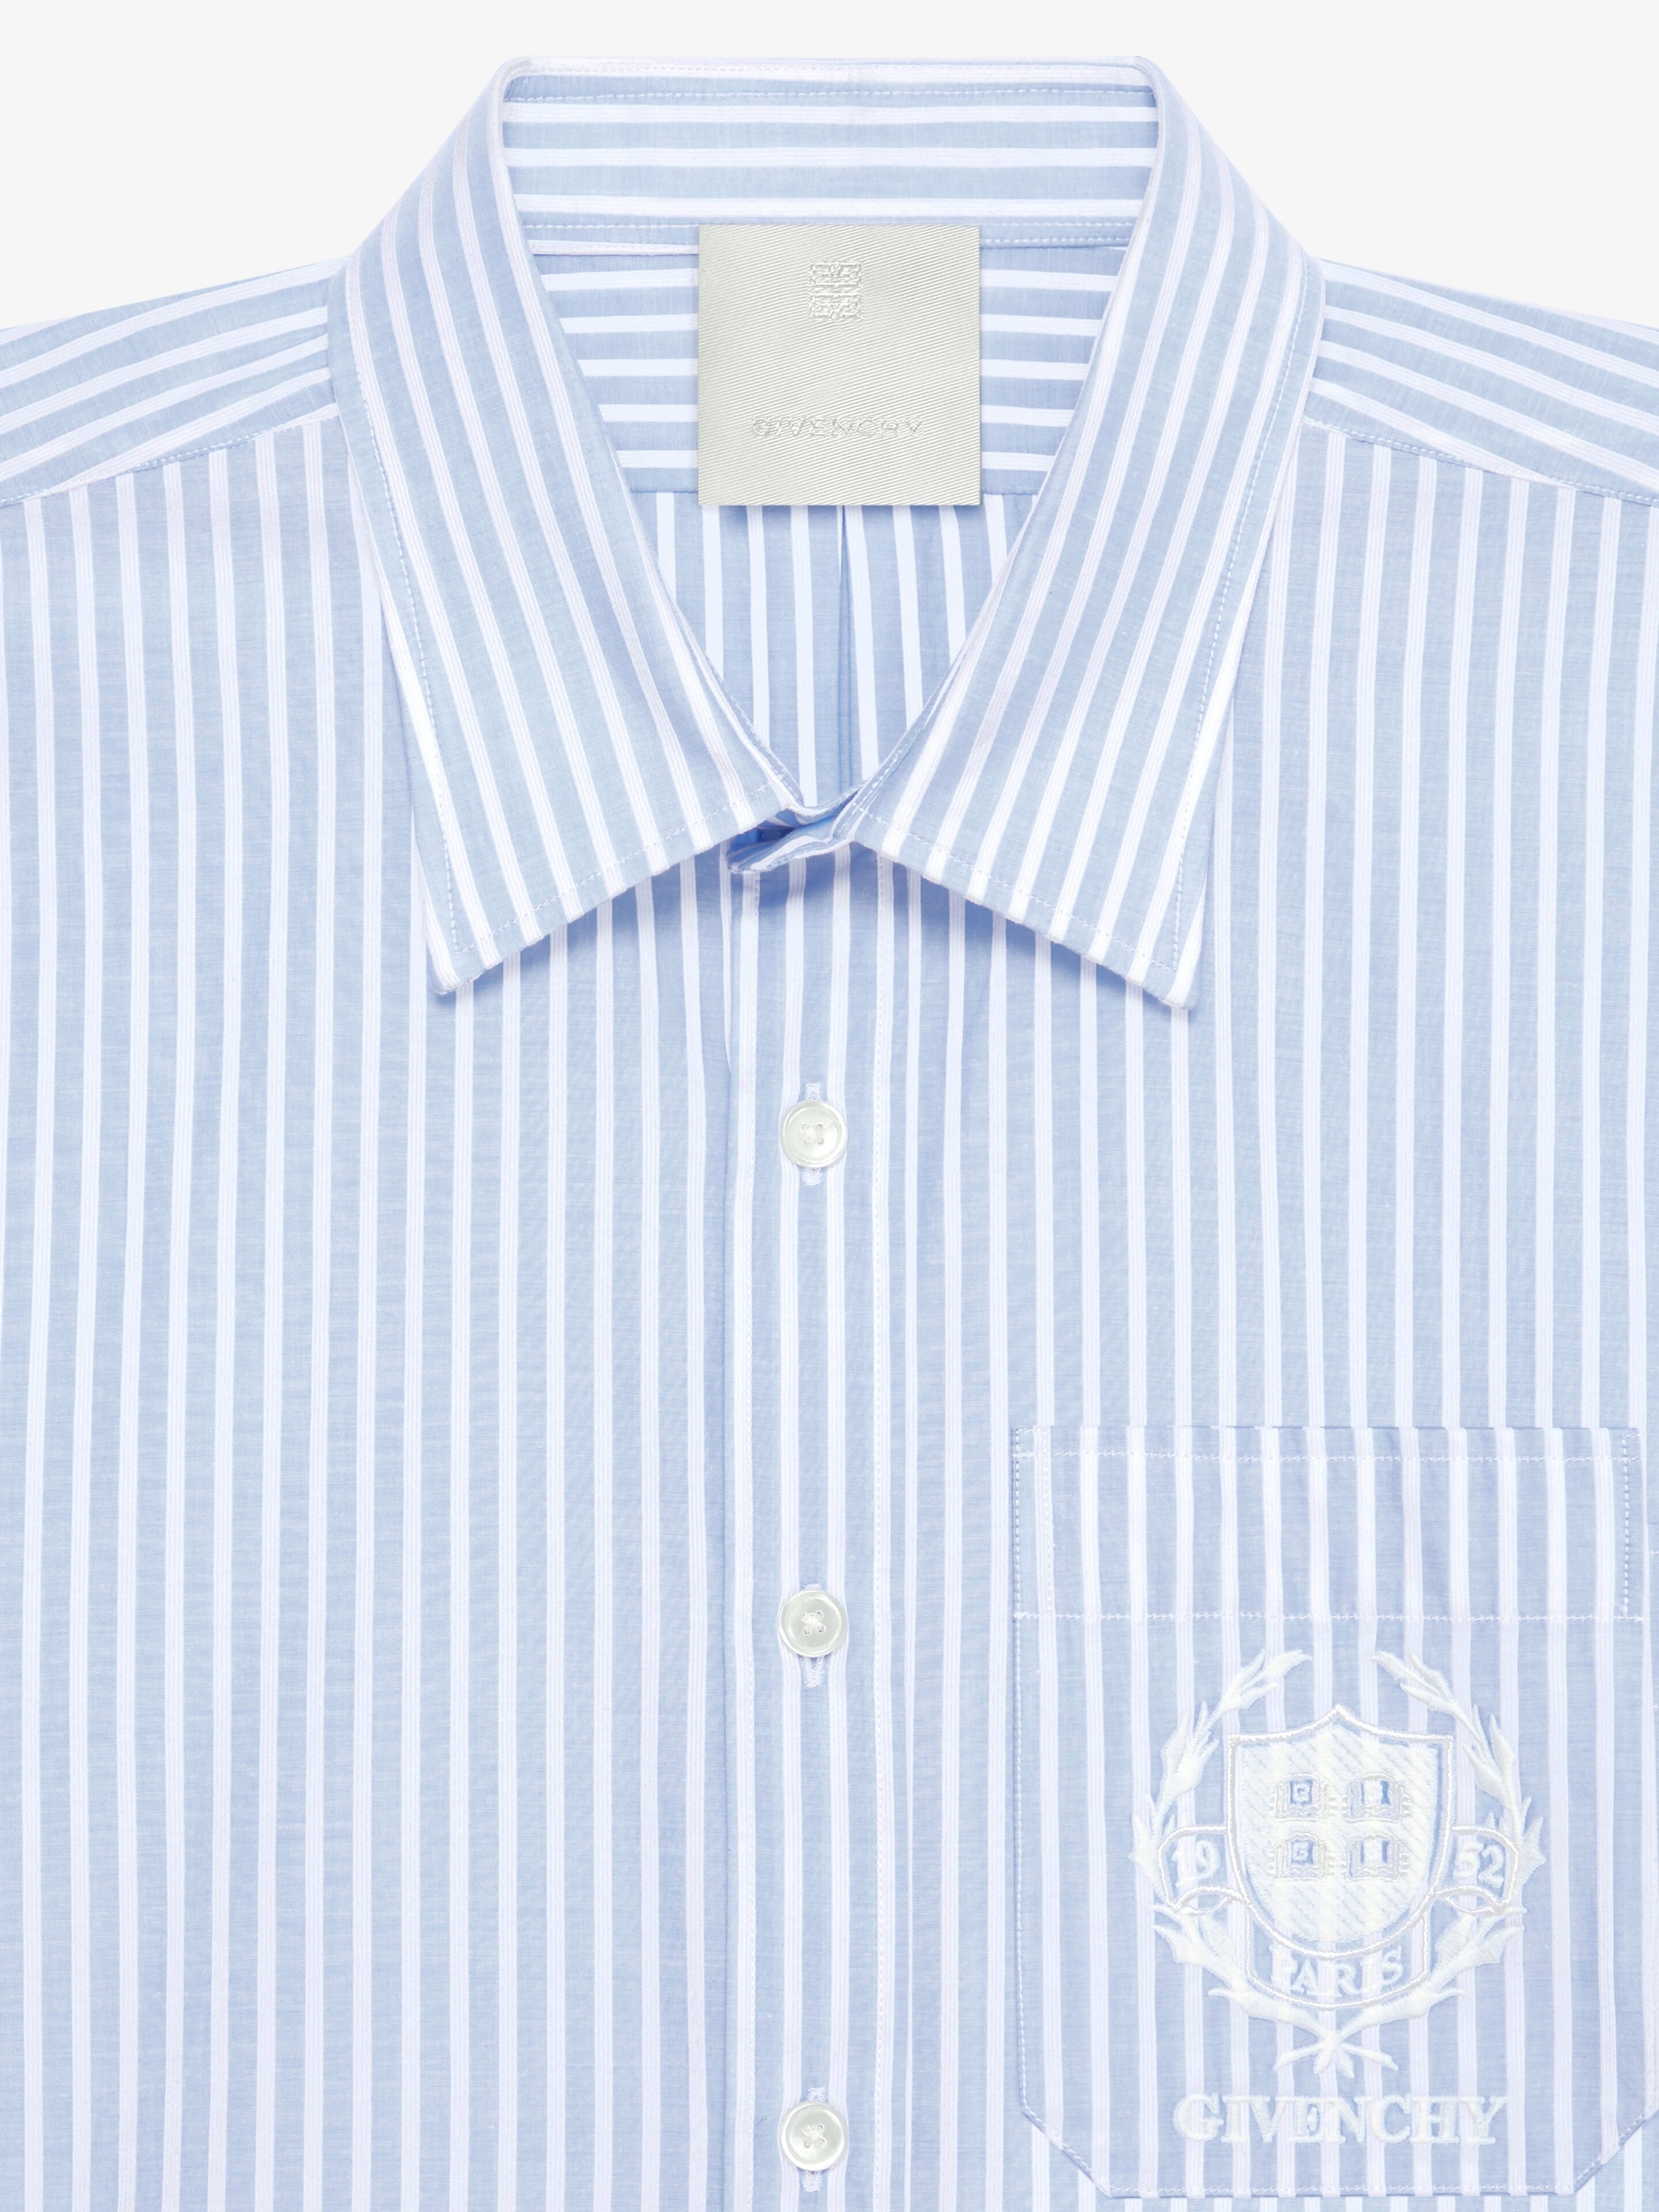 STRIPED GIVENCHY CREST SHIRT IN COTTON - 5